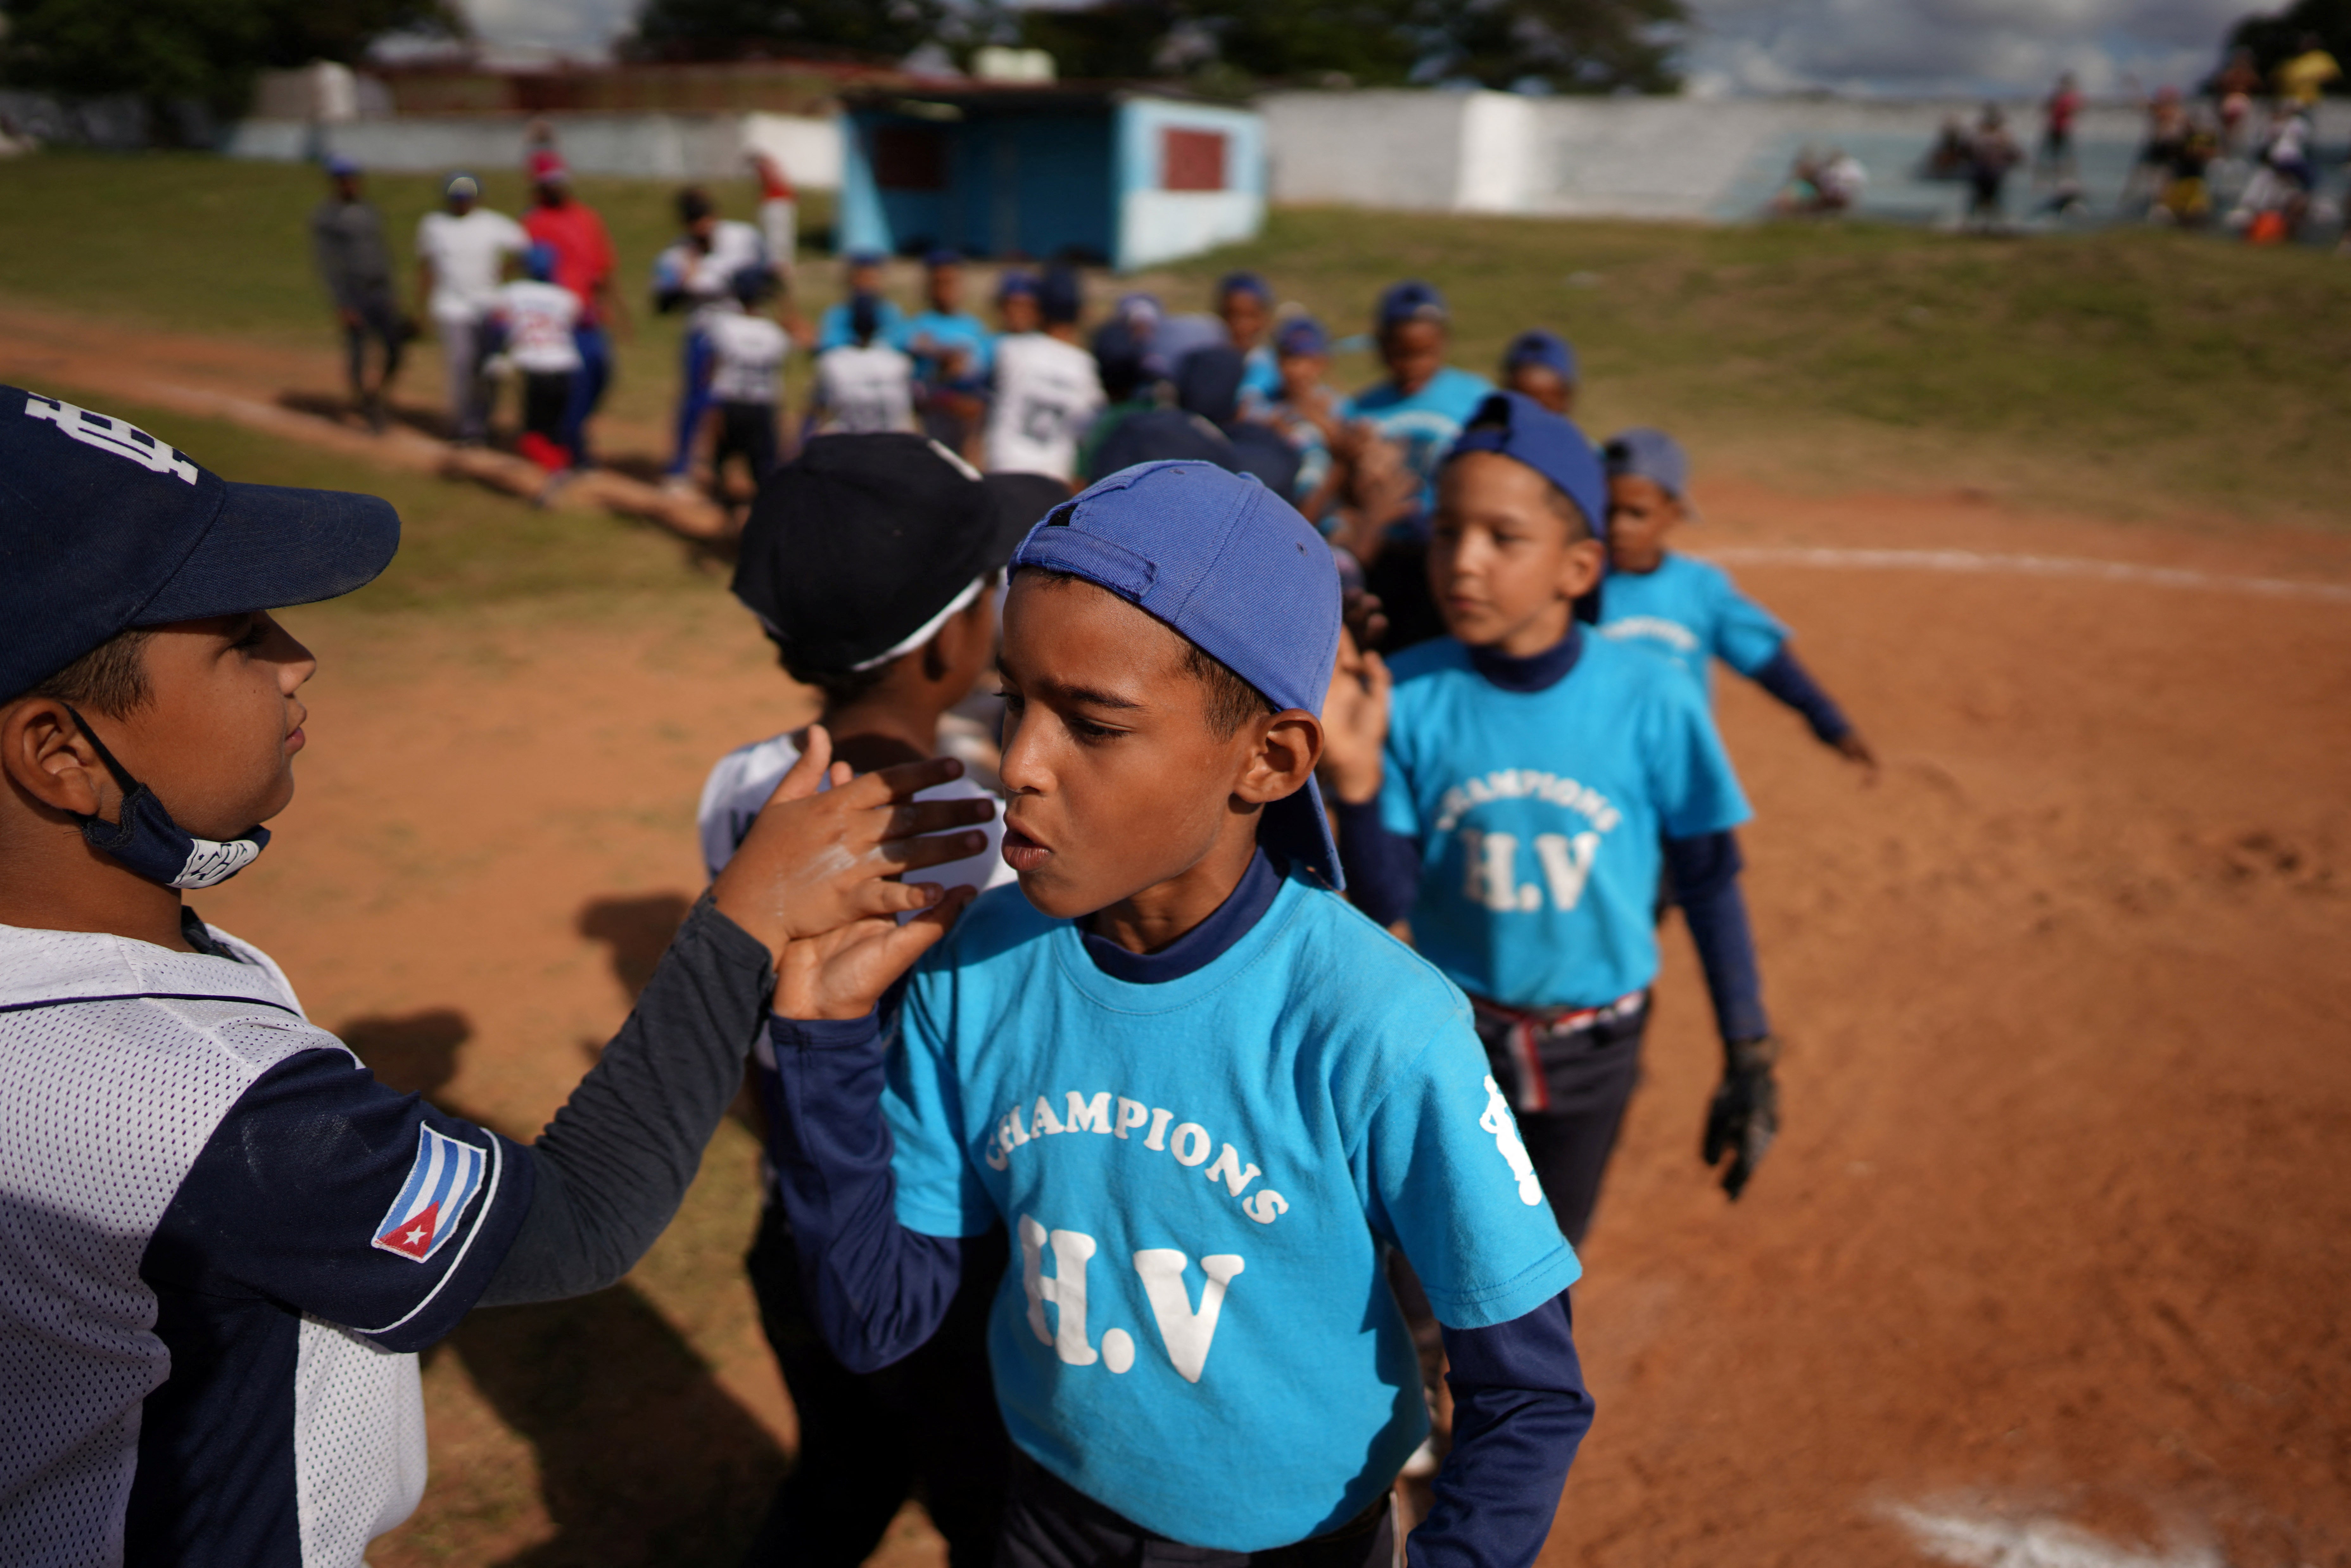 Cuba's baseball players are flocking to the US with dreams of the major  leagues